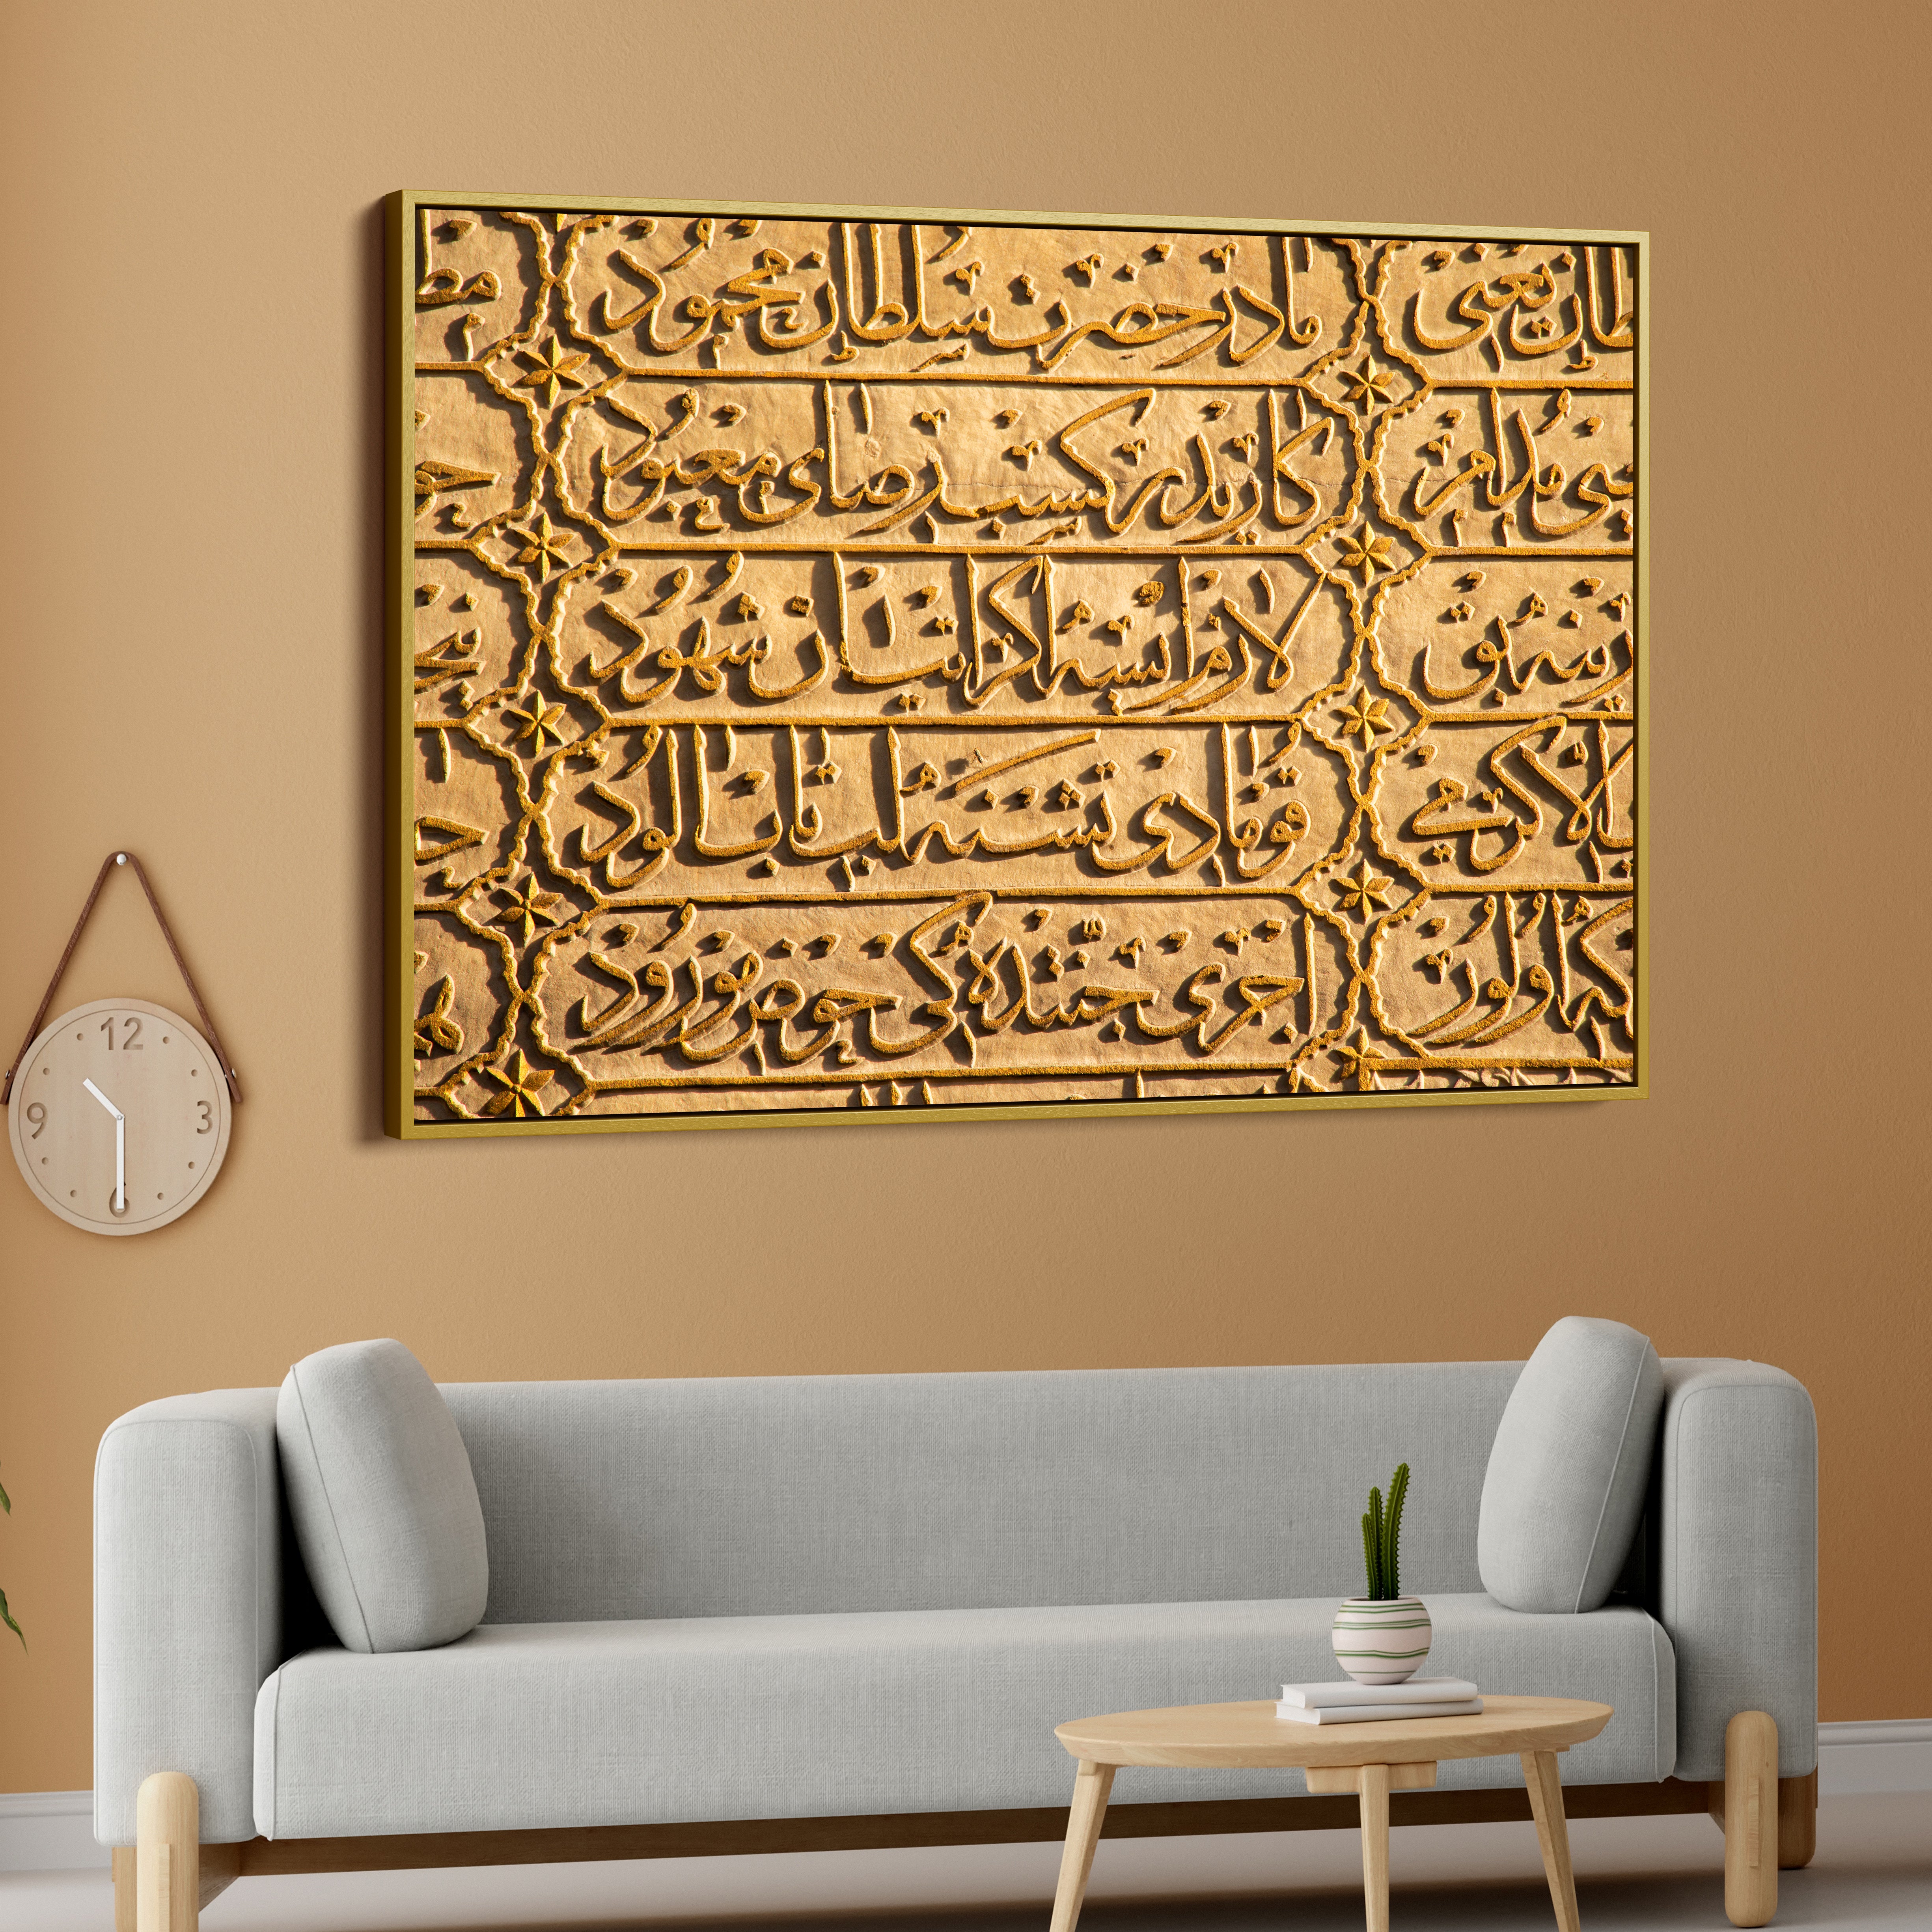 Islamic Words Canvas Wall Painting